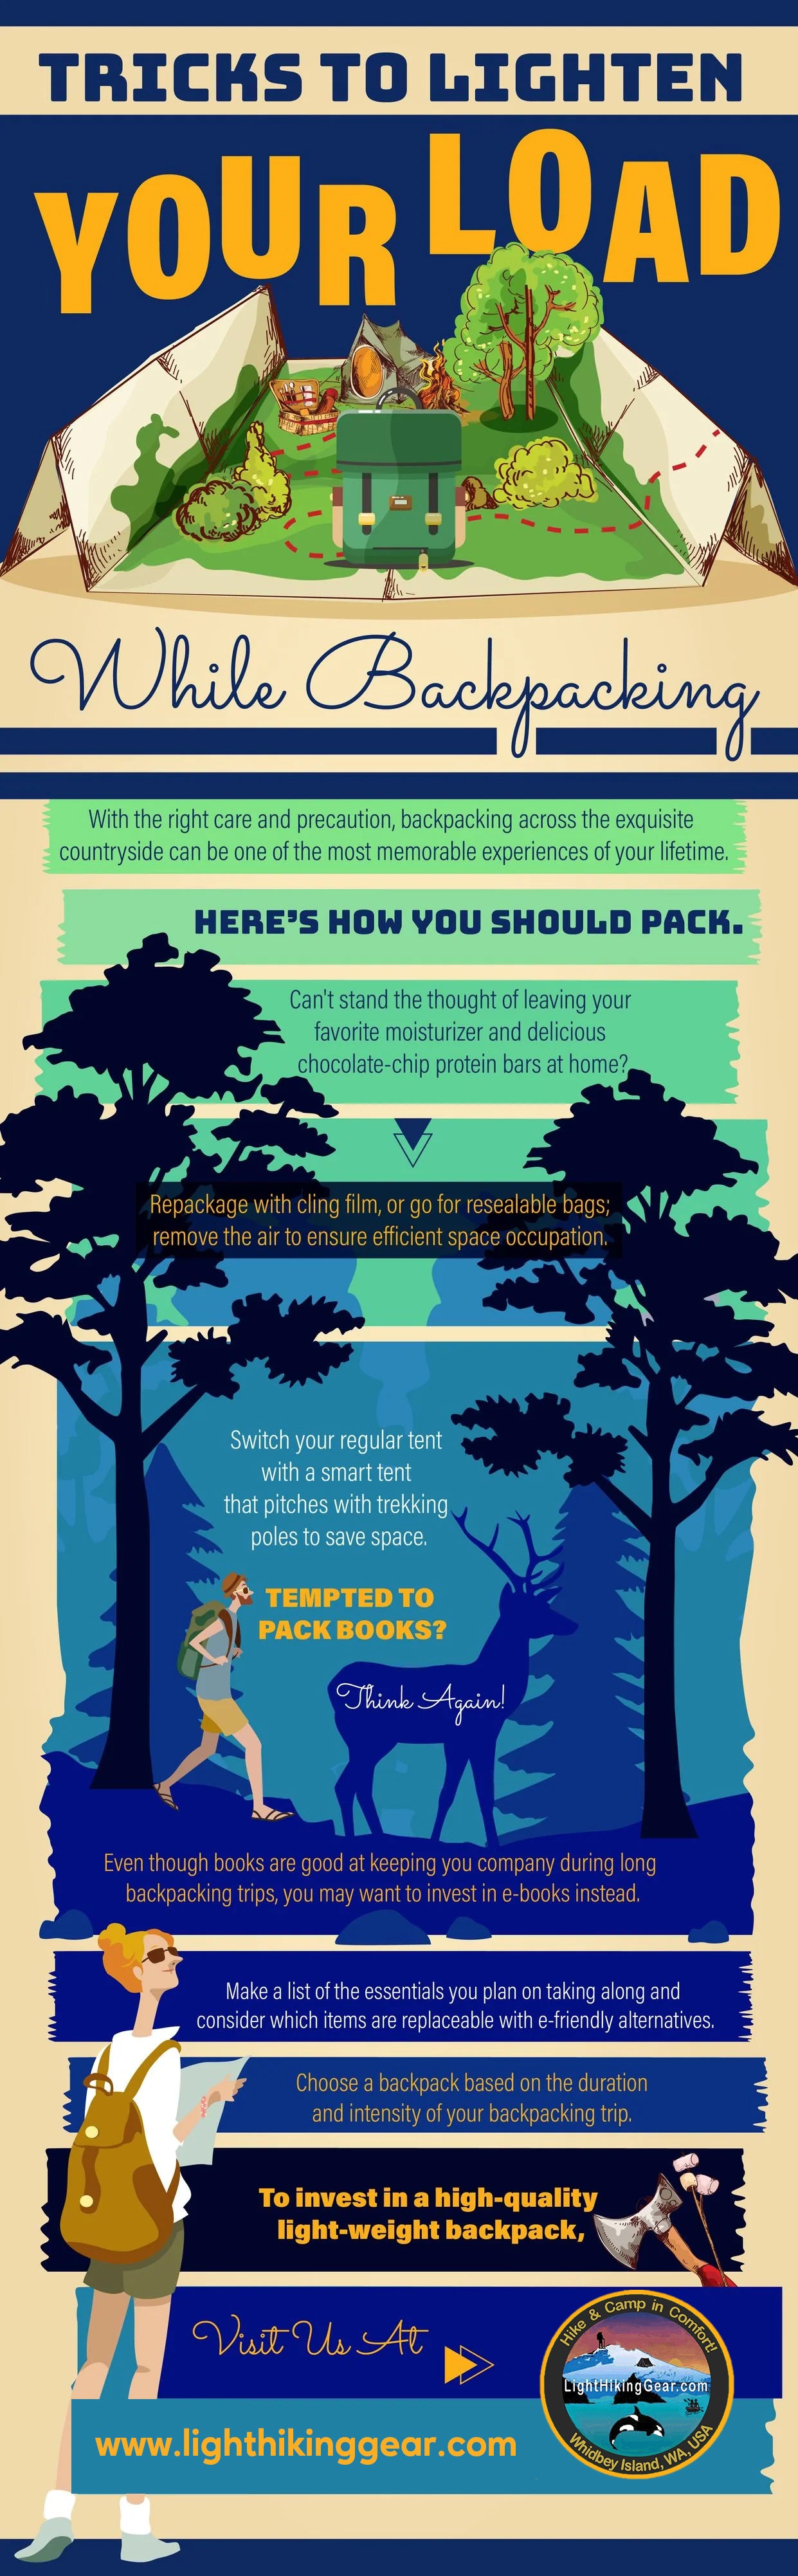 Tricks To Lighten Your Load While Backpacking